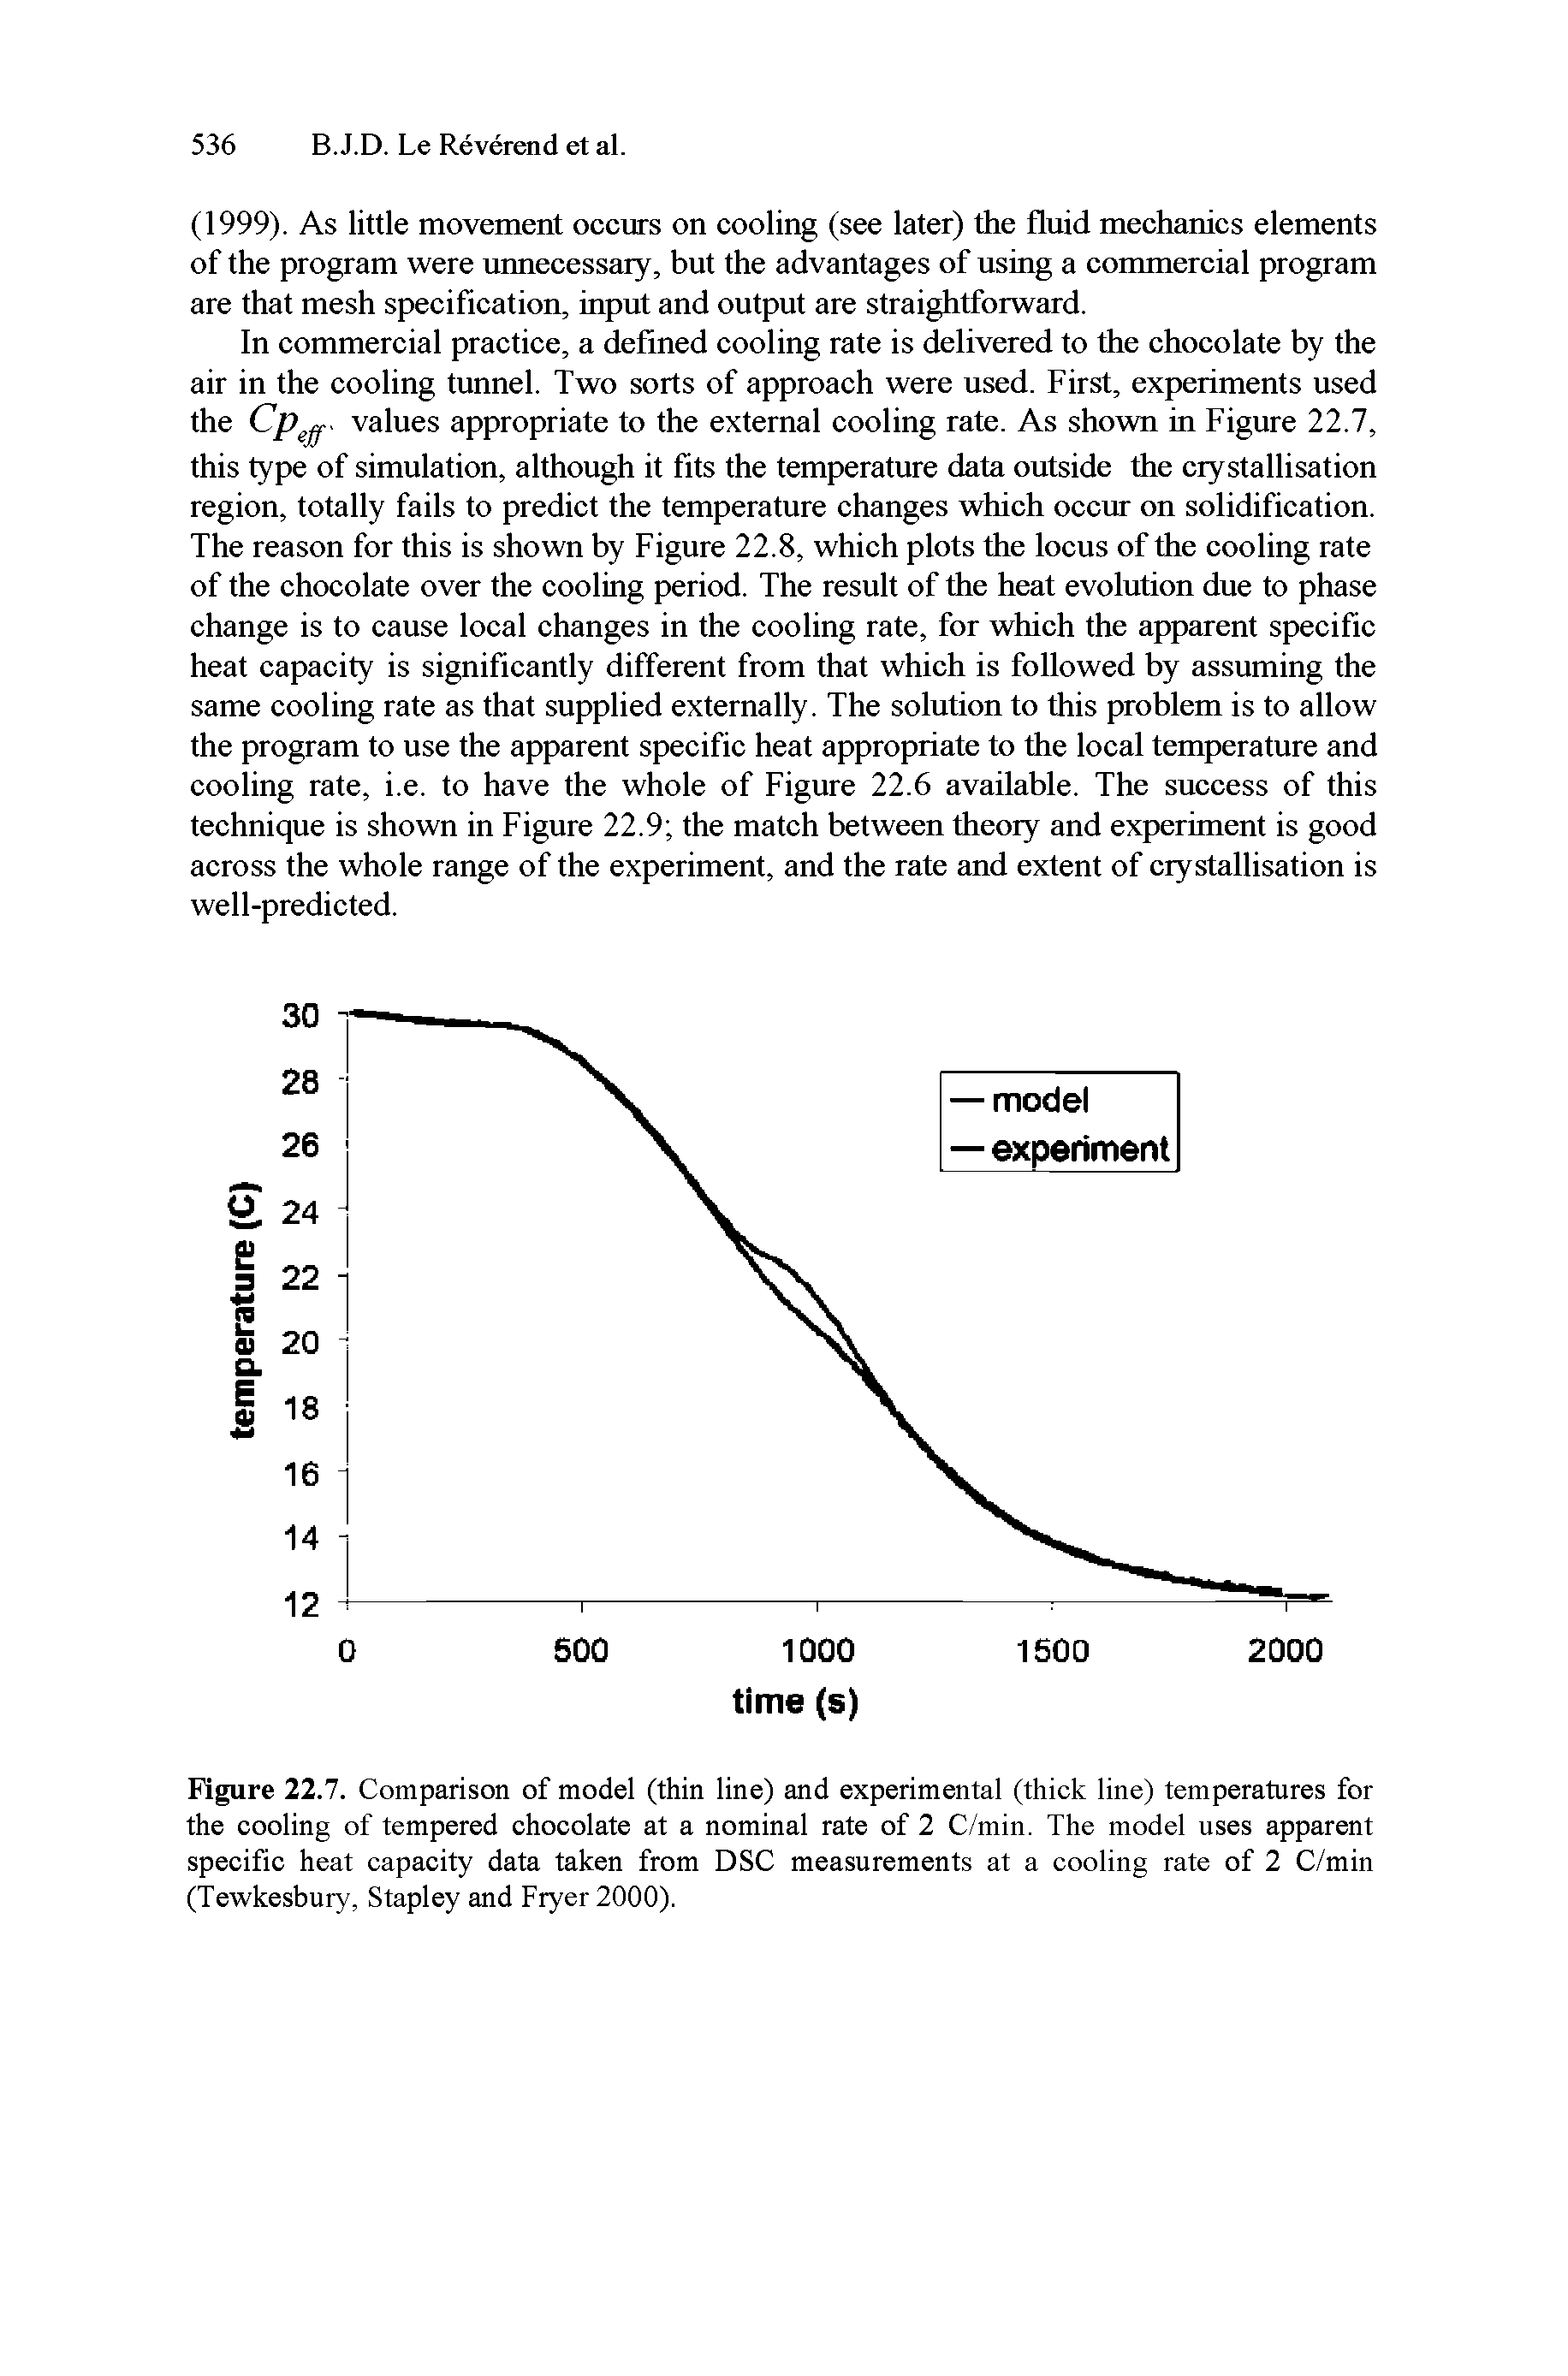 Figure 22.7. Comparison of model (thin line) and experimental (thick line) temperatures for the cooling of tempered chocolate at a nominal rate of 2 C/min. The model uses apparent specific heat capacity data taken from DSC measurements at a cooling rate of 2 C/min (Tewkesbury, Stapley and Fryer 2000).